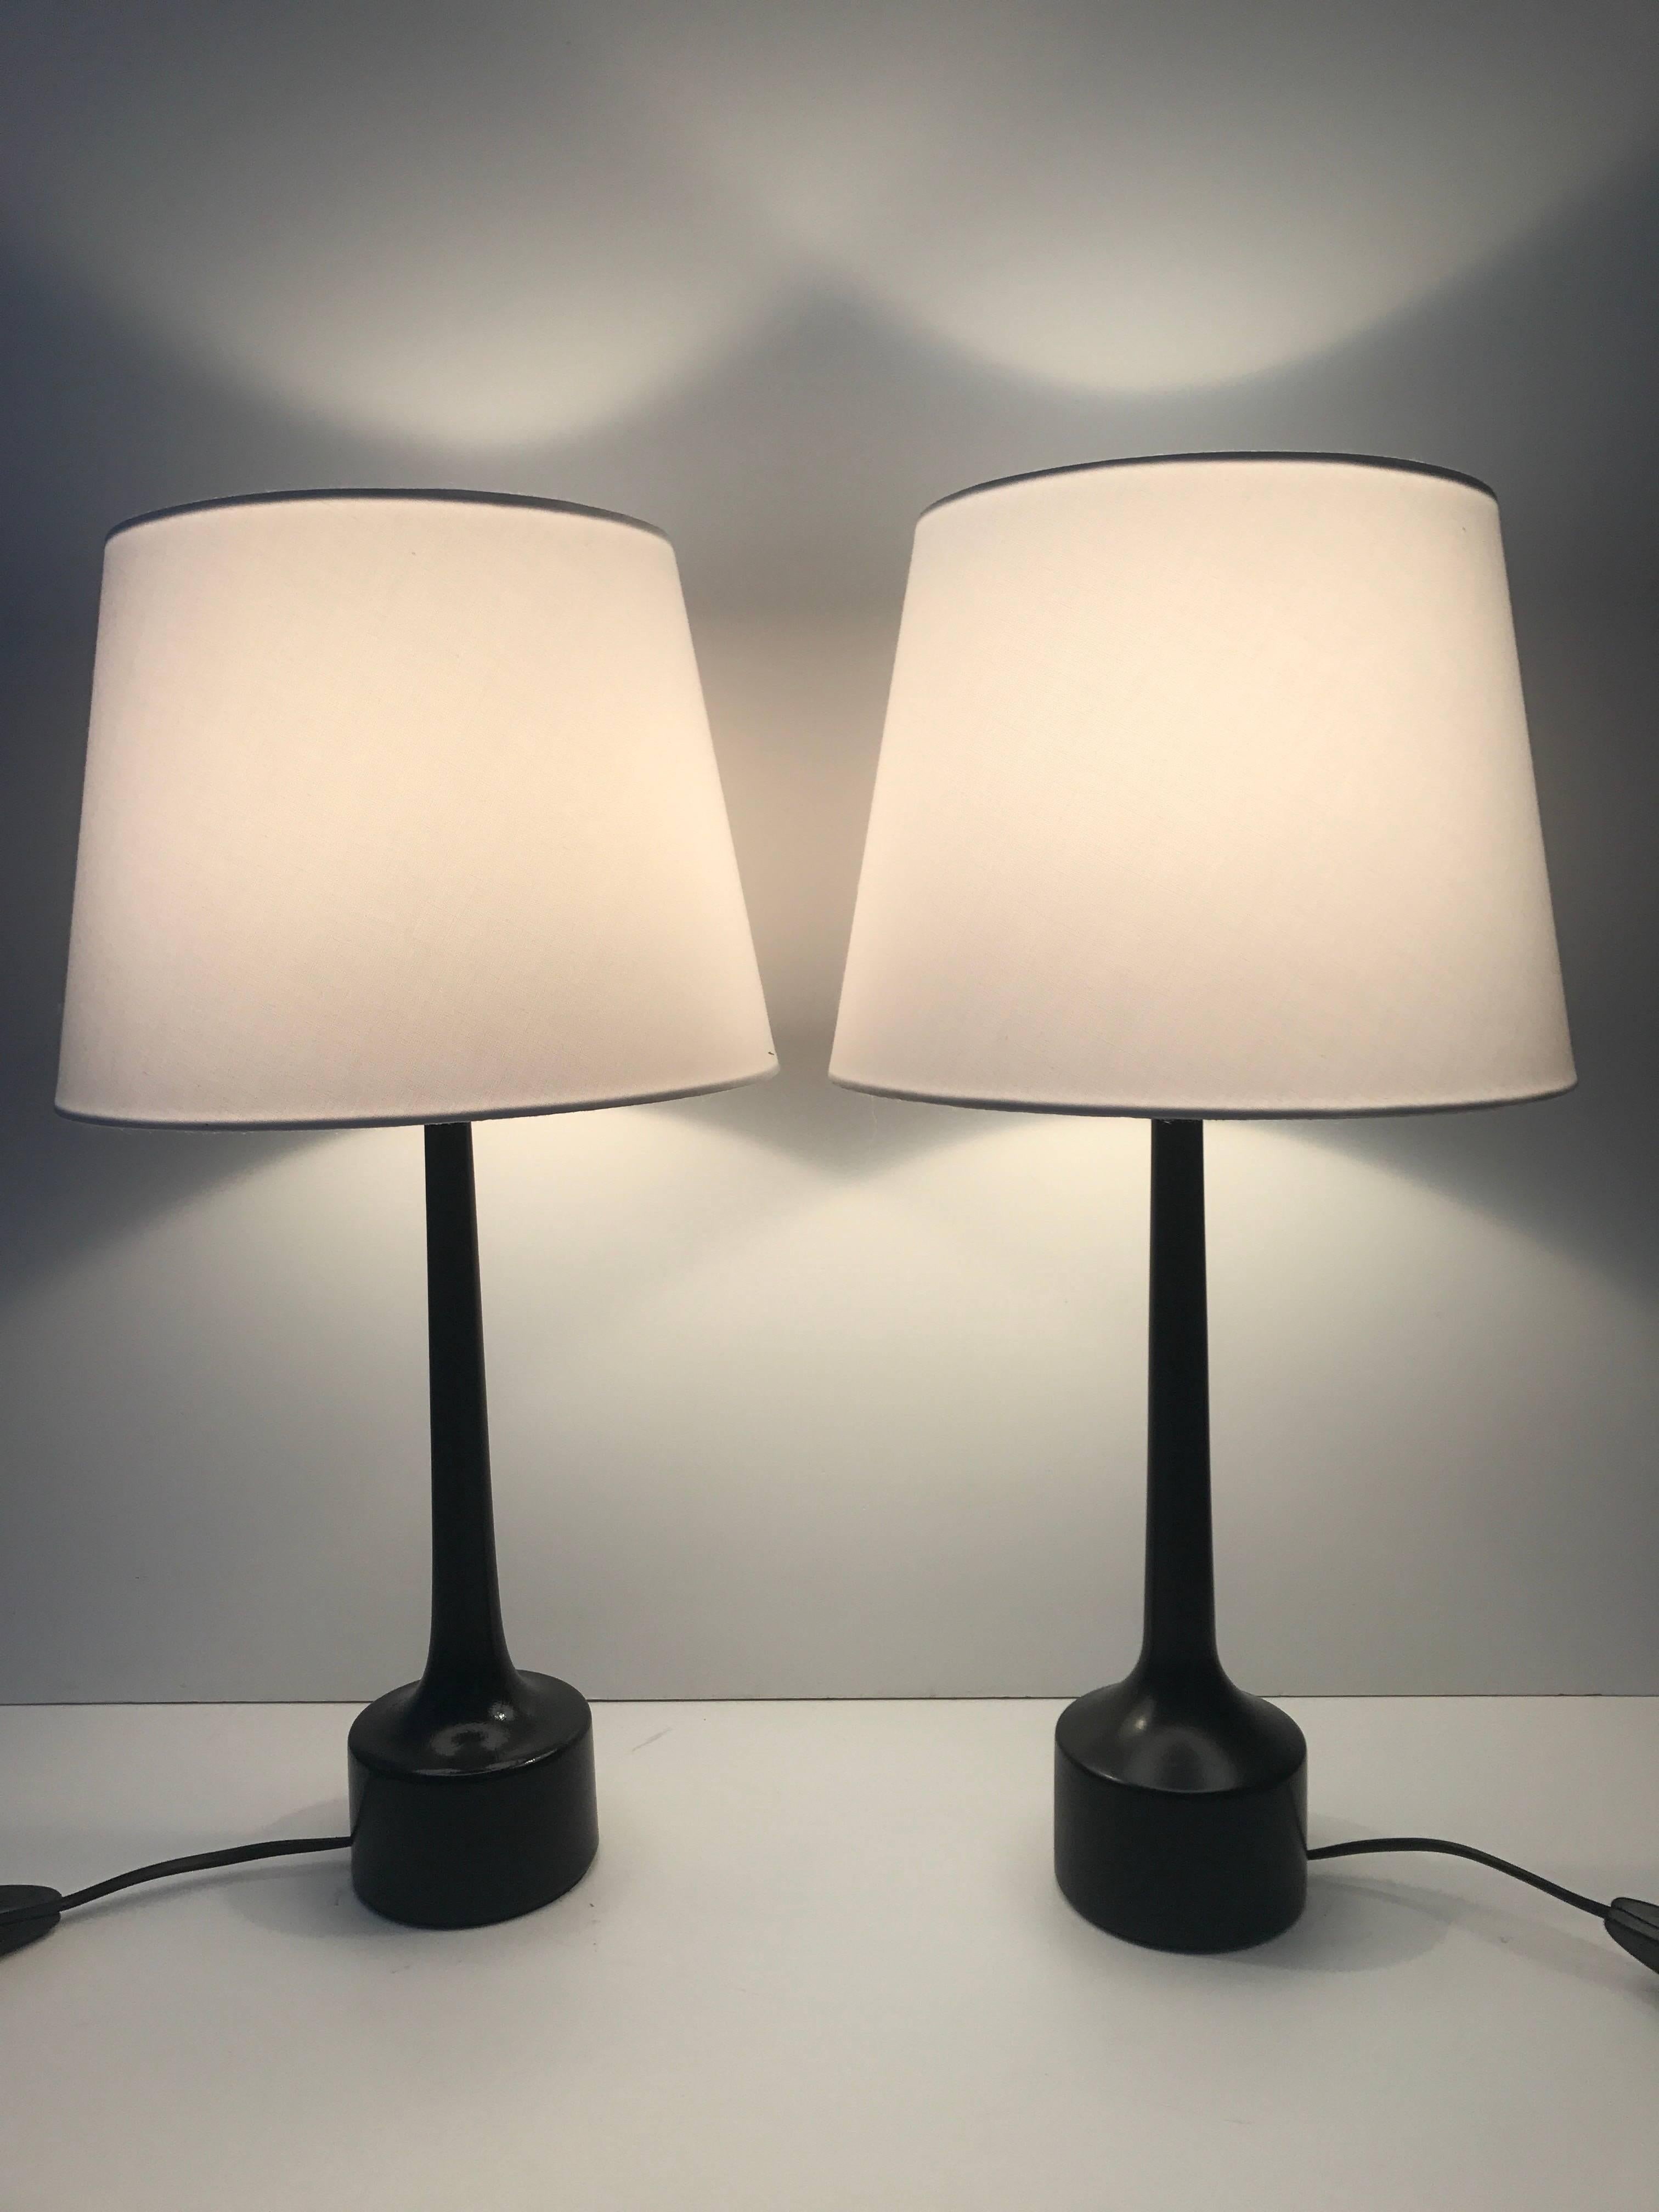 Pair of Swedish Hans-Agne Jakobsson black lacquered wooden table lamps, 1955.
A wonderful pair of table lamps made in the 1950s in a very simplistic Scandinavian Modern style. The lamps display very nicely and are in a fantastic original condition